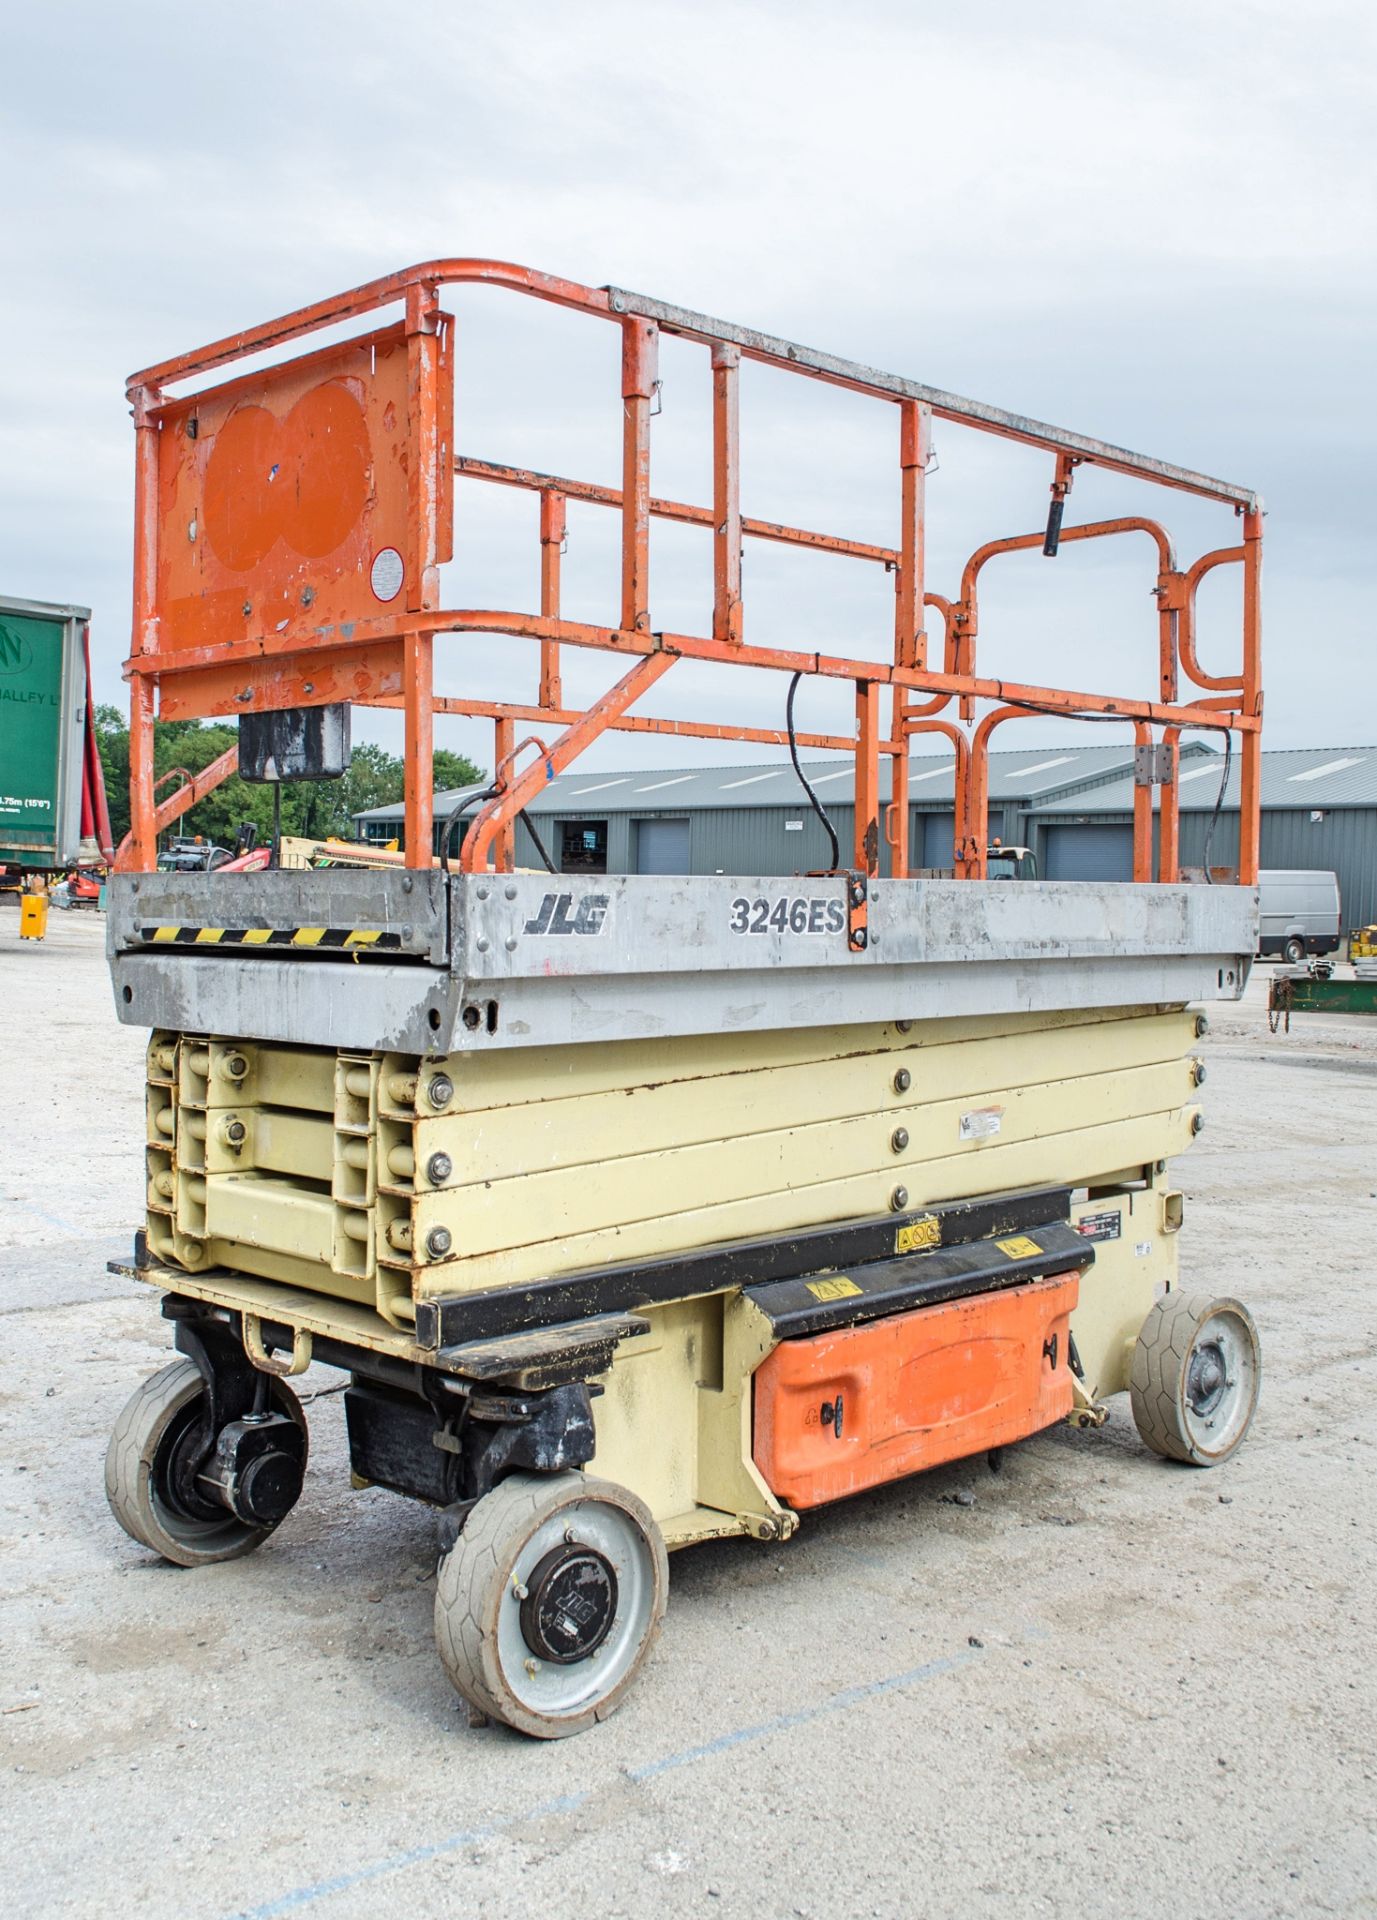 JLG 3246 ES battery electric scissor lift Year: 2006 S/N: 1200007929 Recorded hours: 467 HYP070 - Image 3 of 9